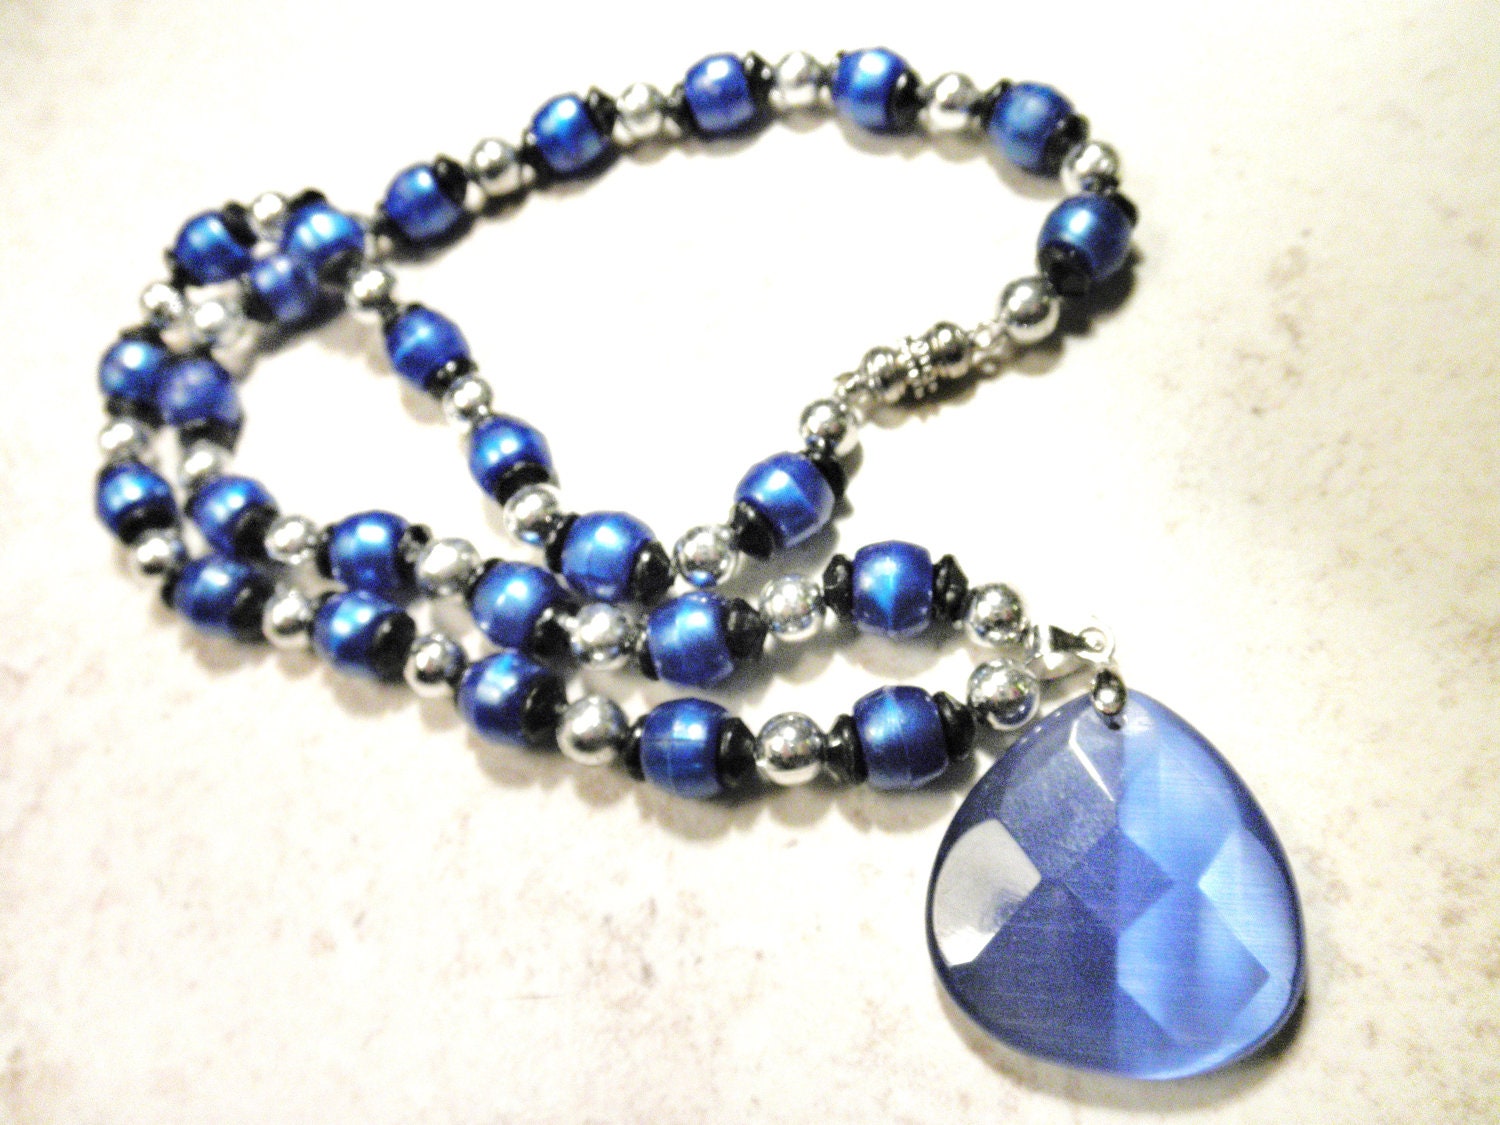 Lovely Royal Blue Faceted Pendant Necklace by Beadaycious on Etsy